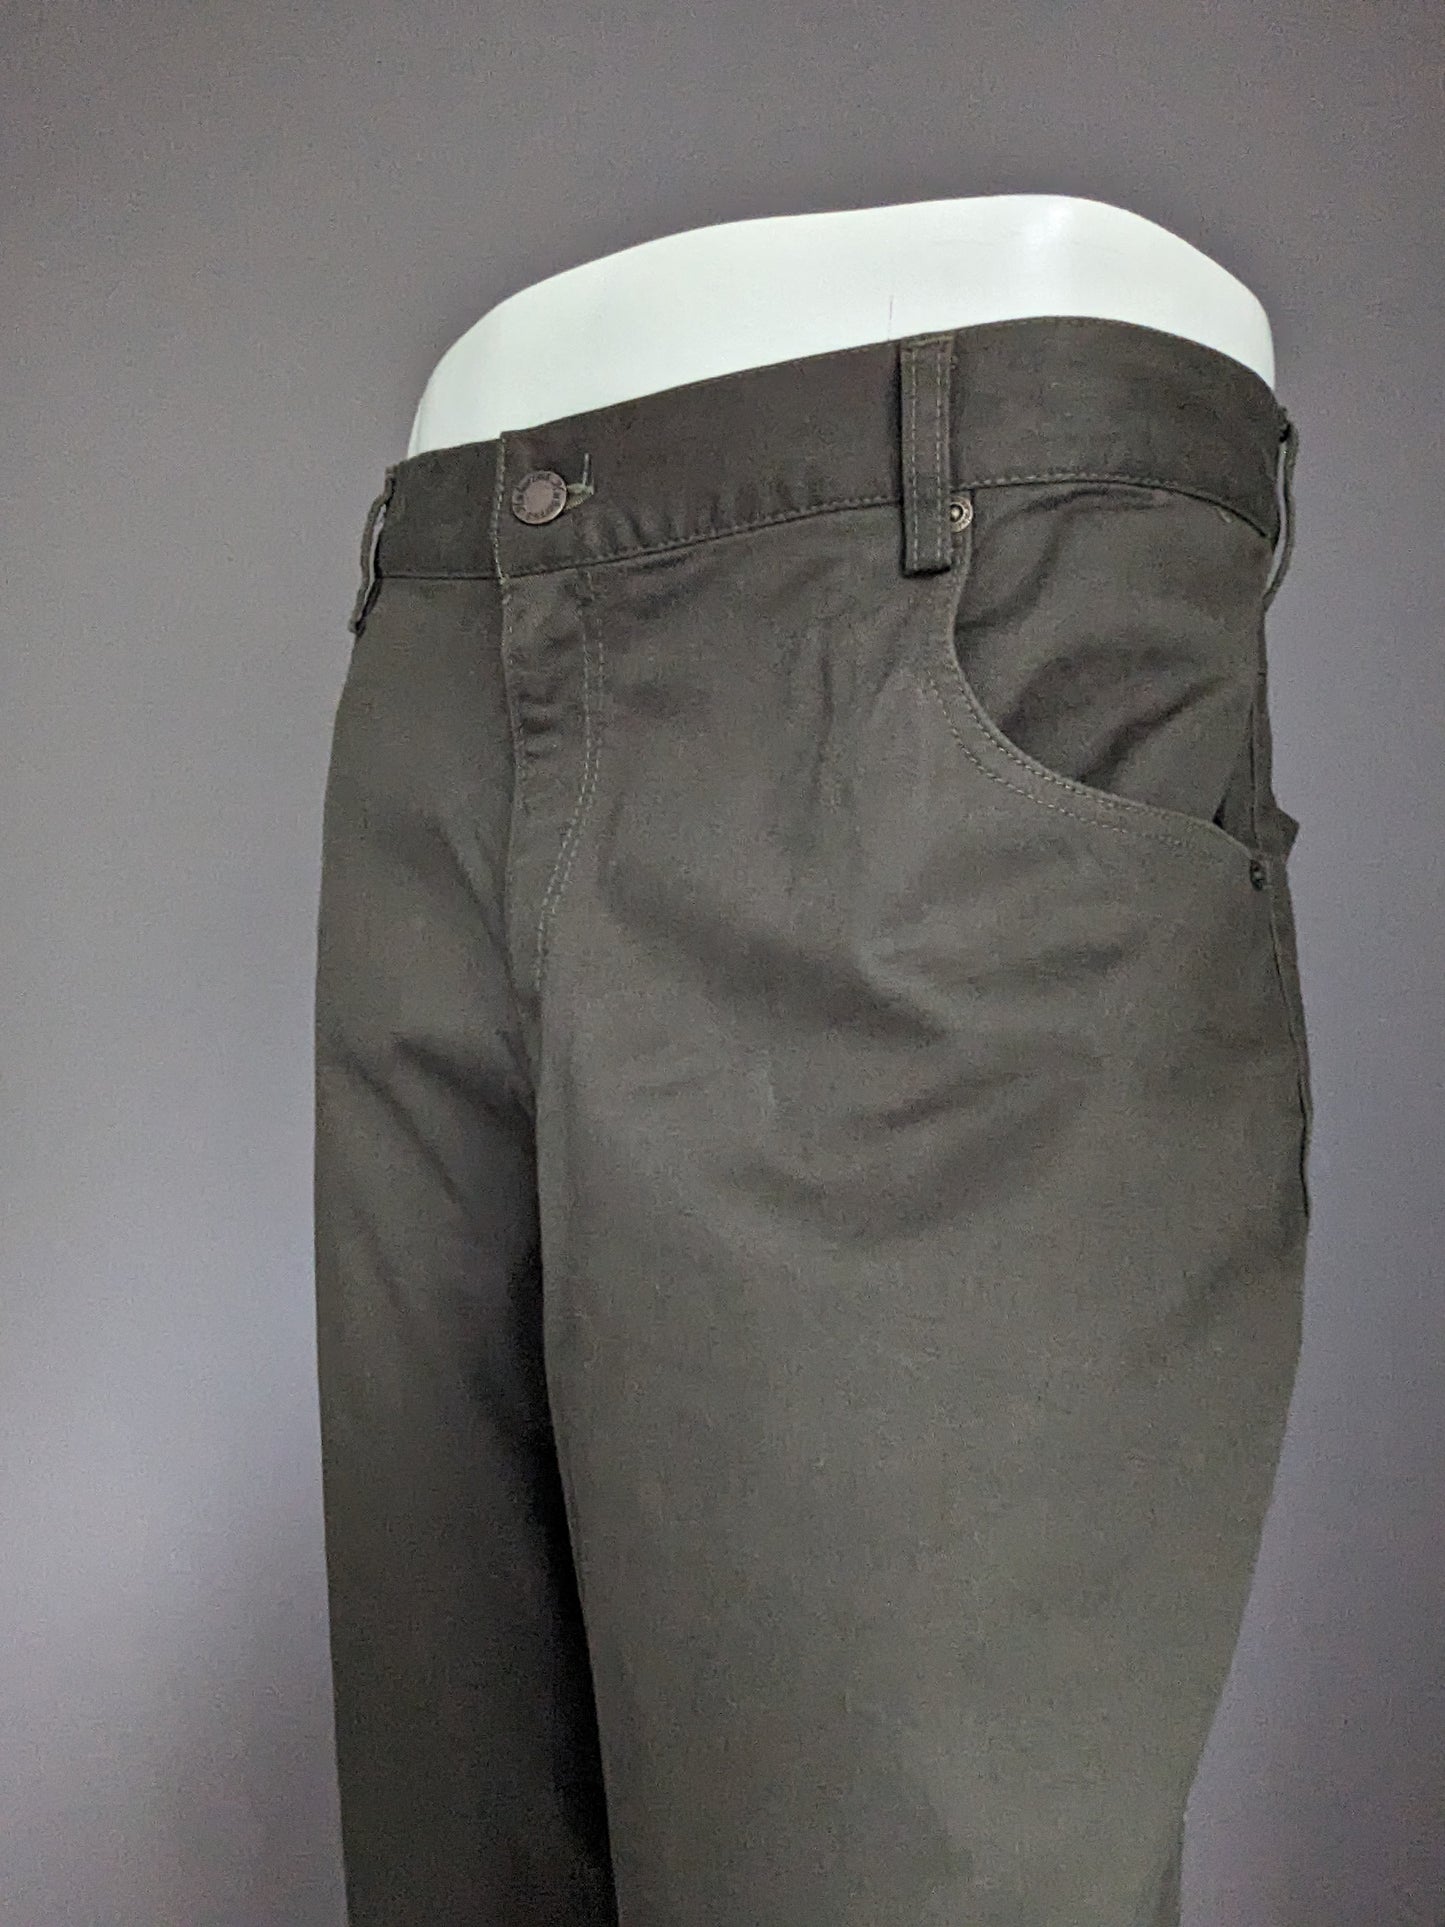 Hubertus Hunting Broek with a pocket side. Dark green colored. Size 29 (58 / XL-2XL)